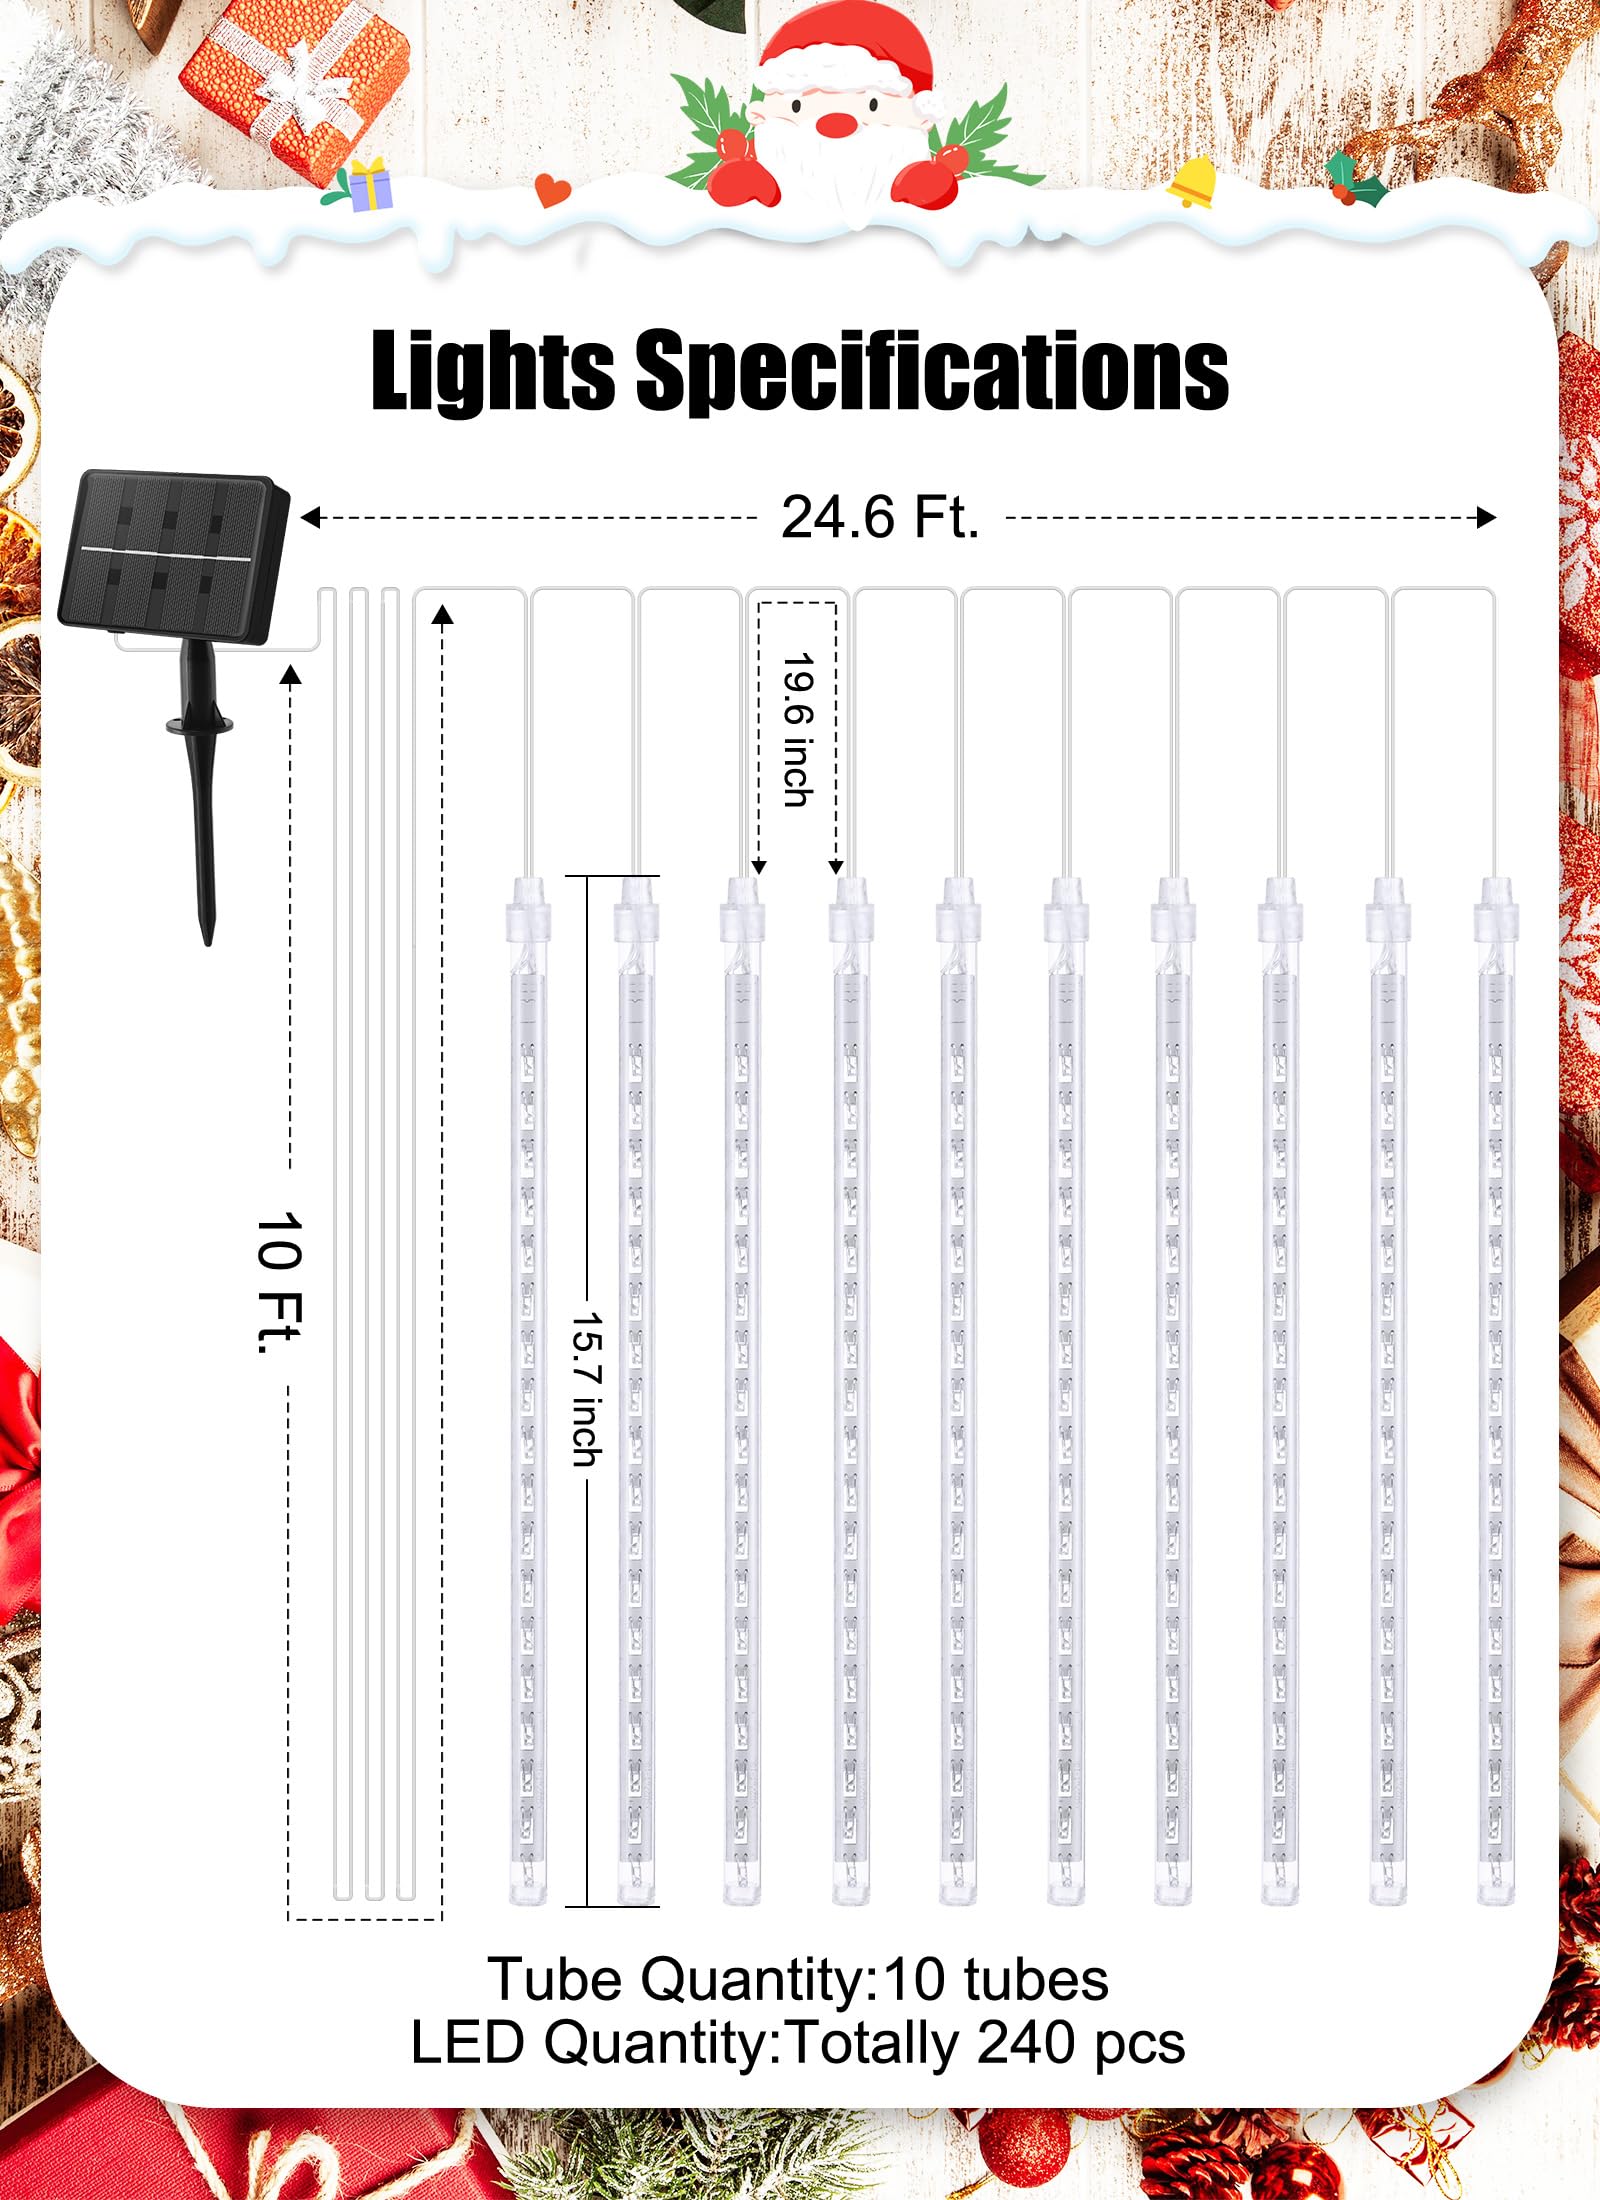 1 x 16 Inches / 10 Tubes / 240 LED / Pure White